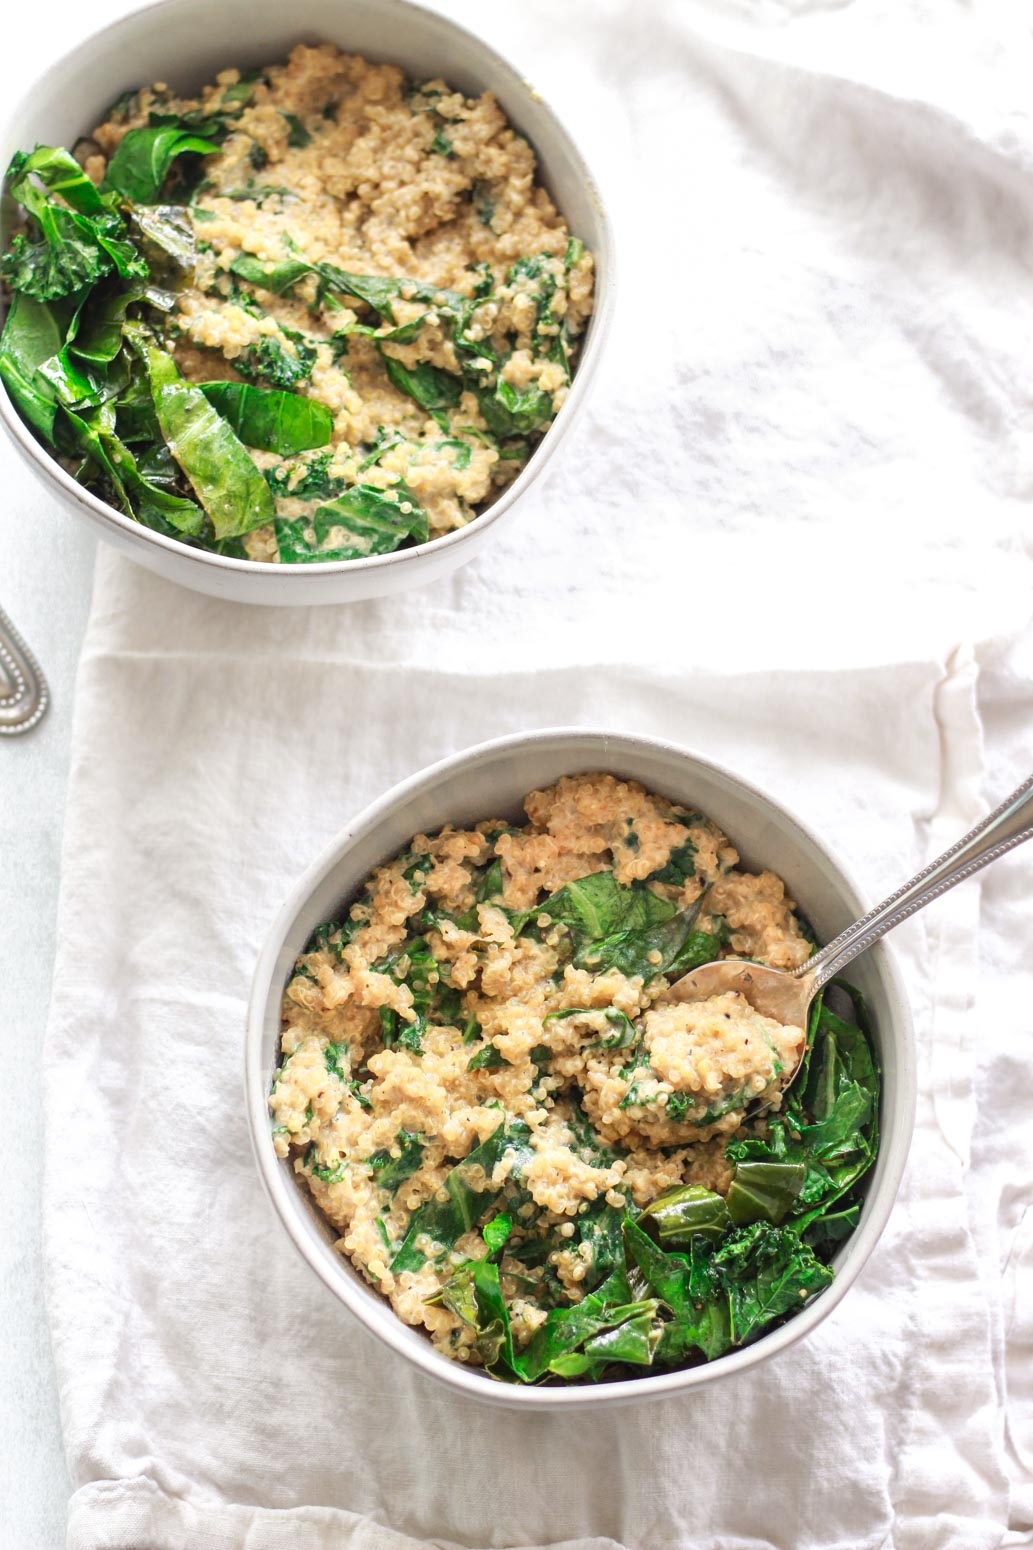 This savory, creamy quinoa and greens is a versatile side dish, but also filling enough to be a main. Coconut milk adds creaminess to this flavorful savory quinoa dish. This creamy coconut quinoa and greens is packed with umami flavor and protein!